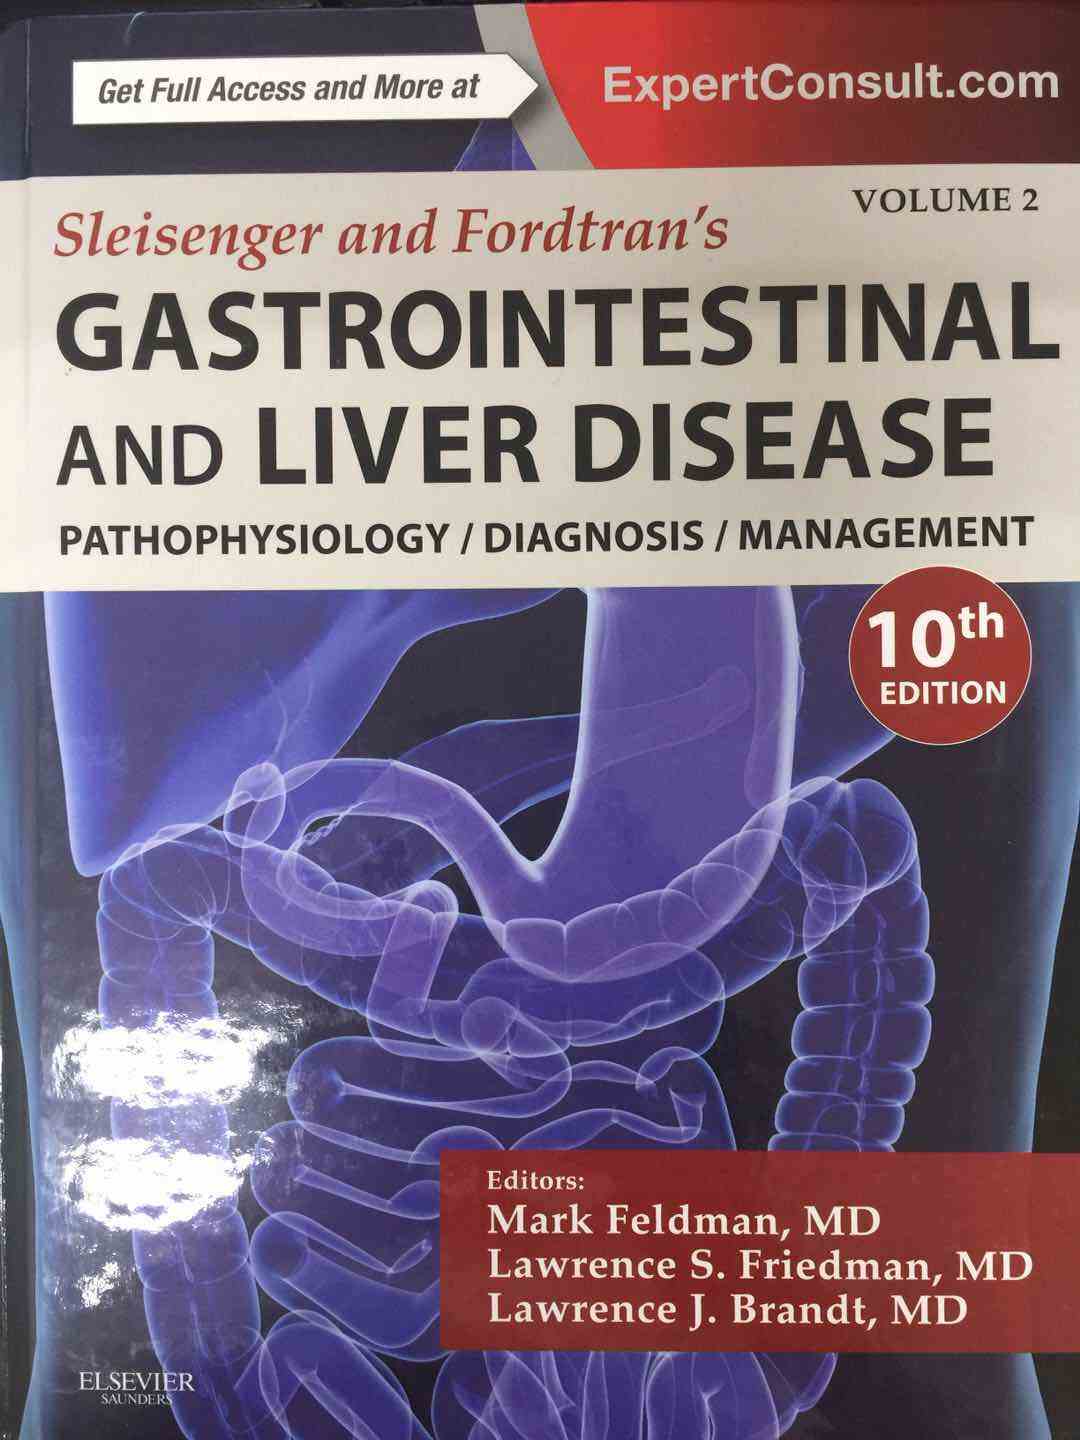 《Gastrointestinal and Liver Disease》